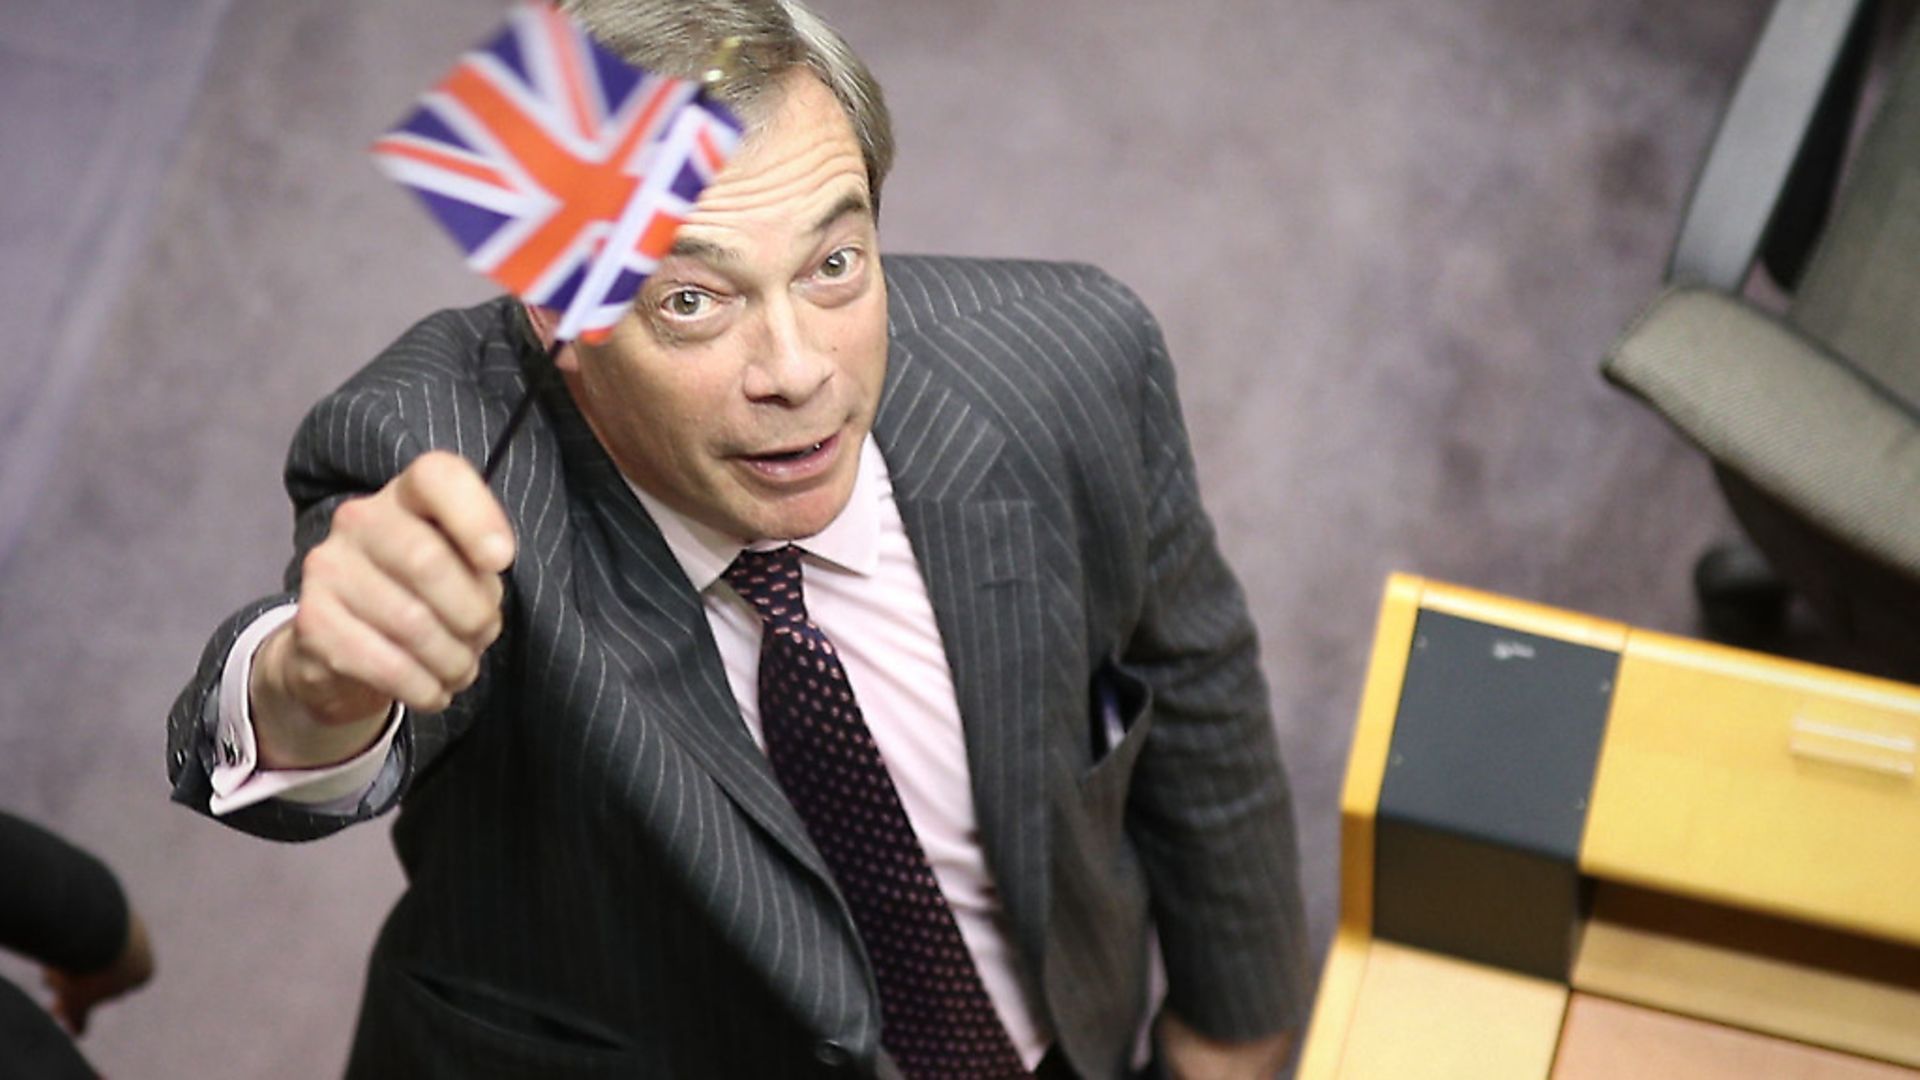 Nigel Farage in the parliament chamber at the European Parliament in Brussels. Photo: Yui Mok/PA Wire. - Credit: PA